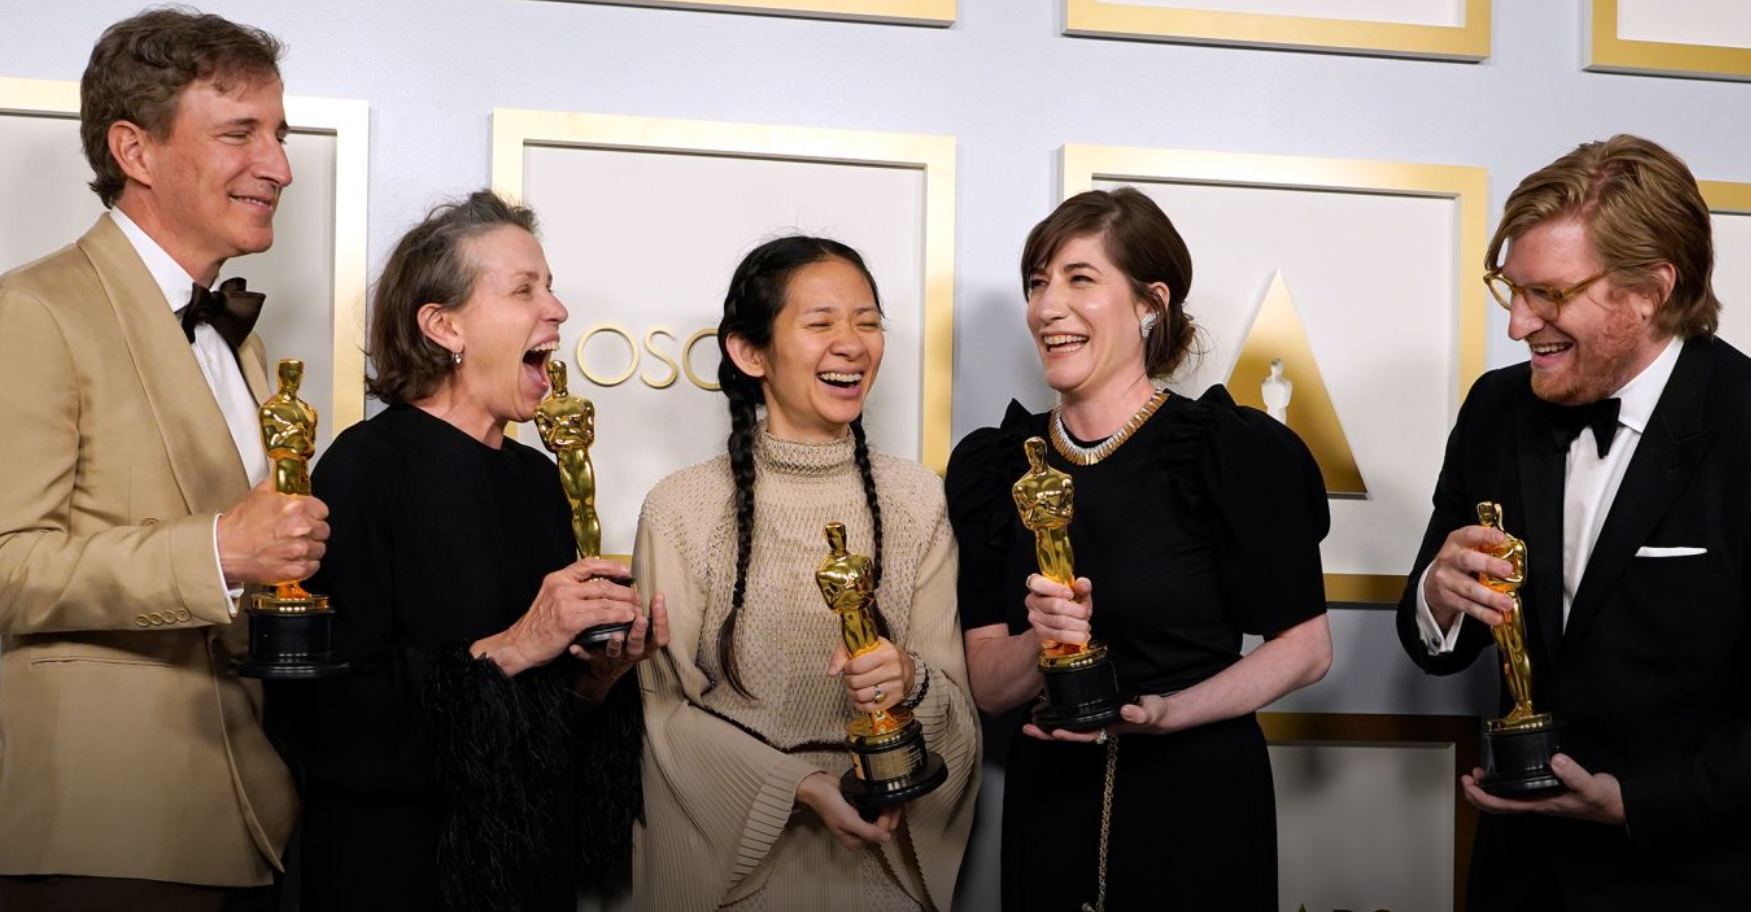 From left, producer Peter Spears, actress Frances McDormand, director Chloé Zhao, producer Mollye Asher and producer Dan Janvey pose with their Oscars in the press room after their film "Nomadland" won best picture on Sunday, April 25.Chris Pizz